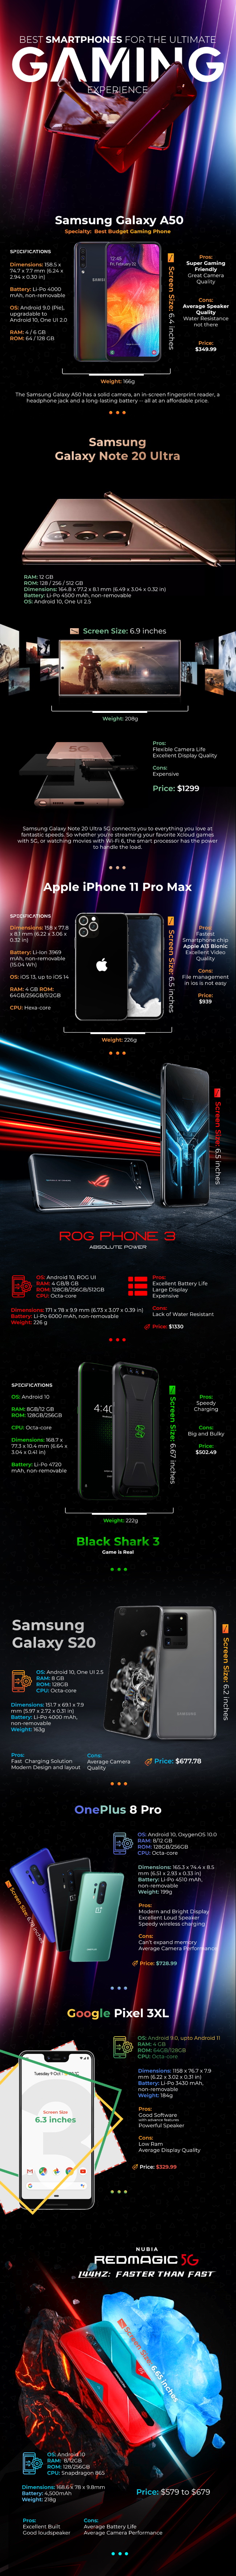 Top 10 Ultimate Gaming Smartphones Infographic